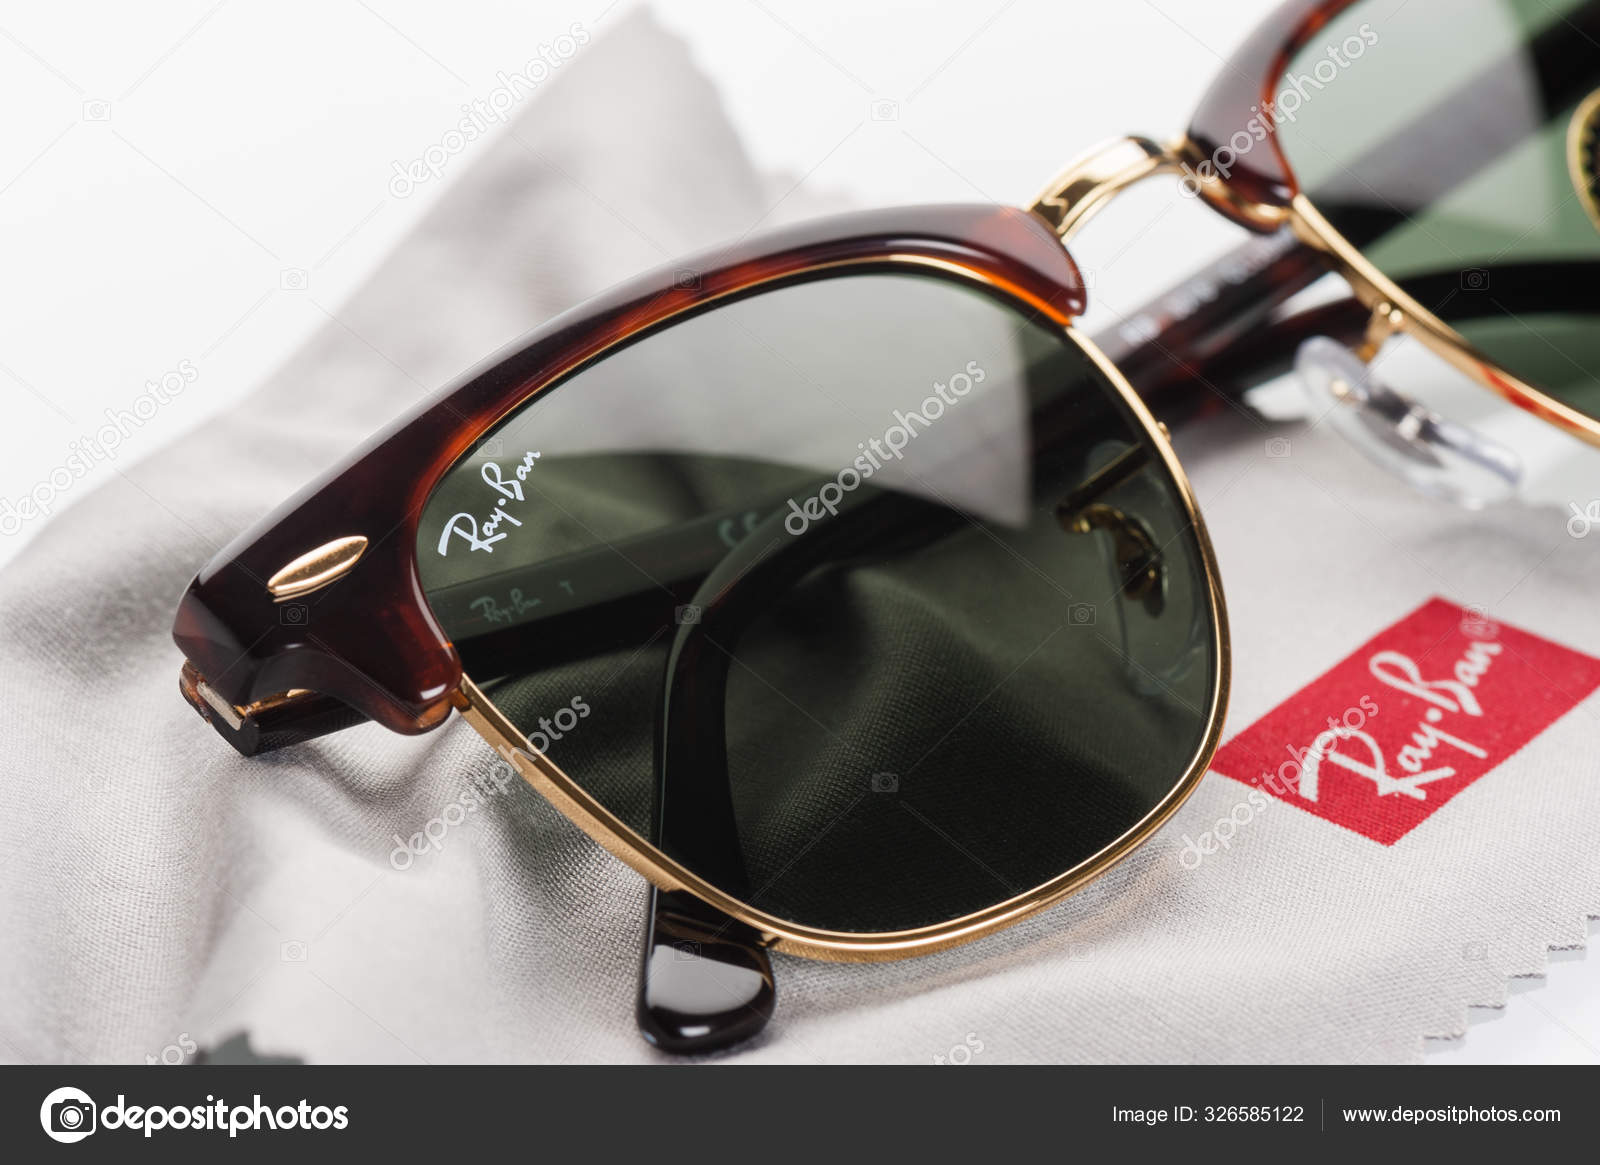 Sunglasses from RayBan – Stock Editorial Photo © norgallery #326585122